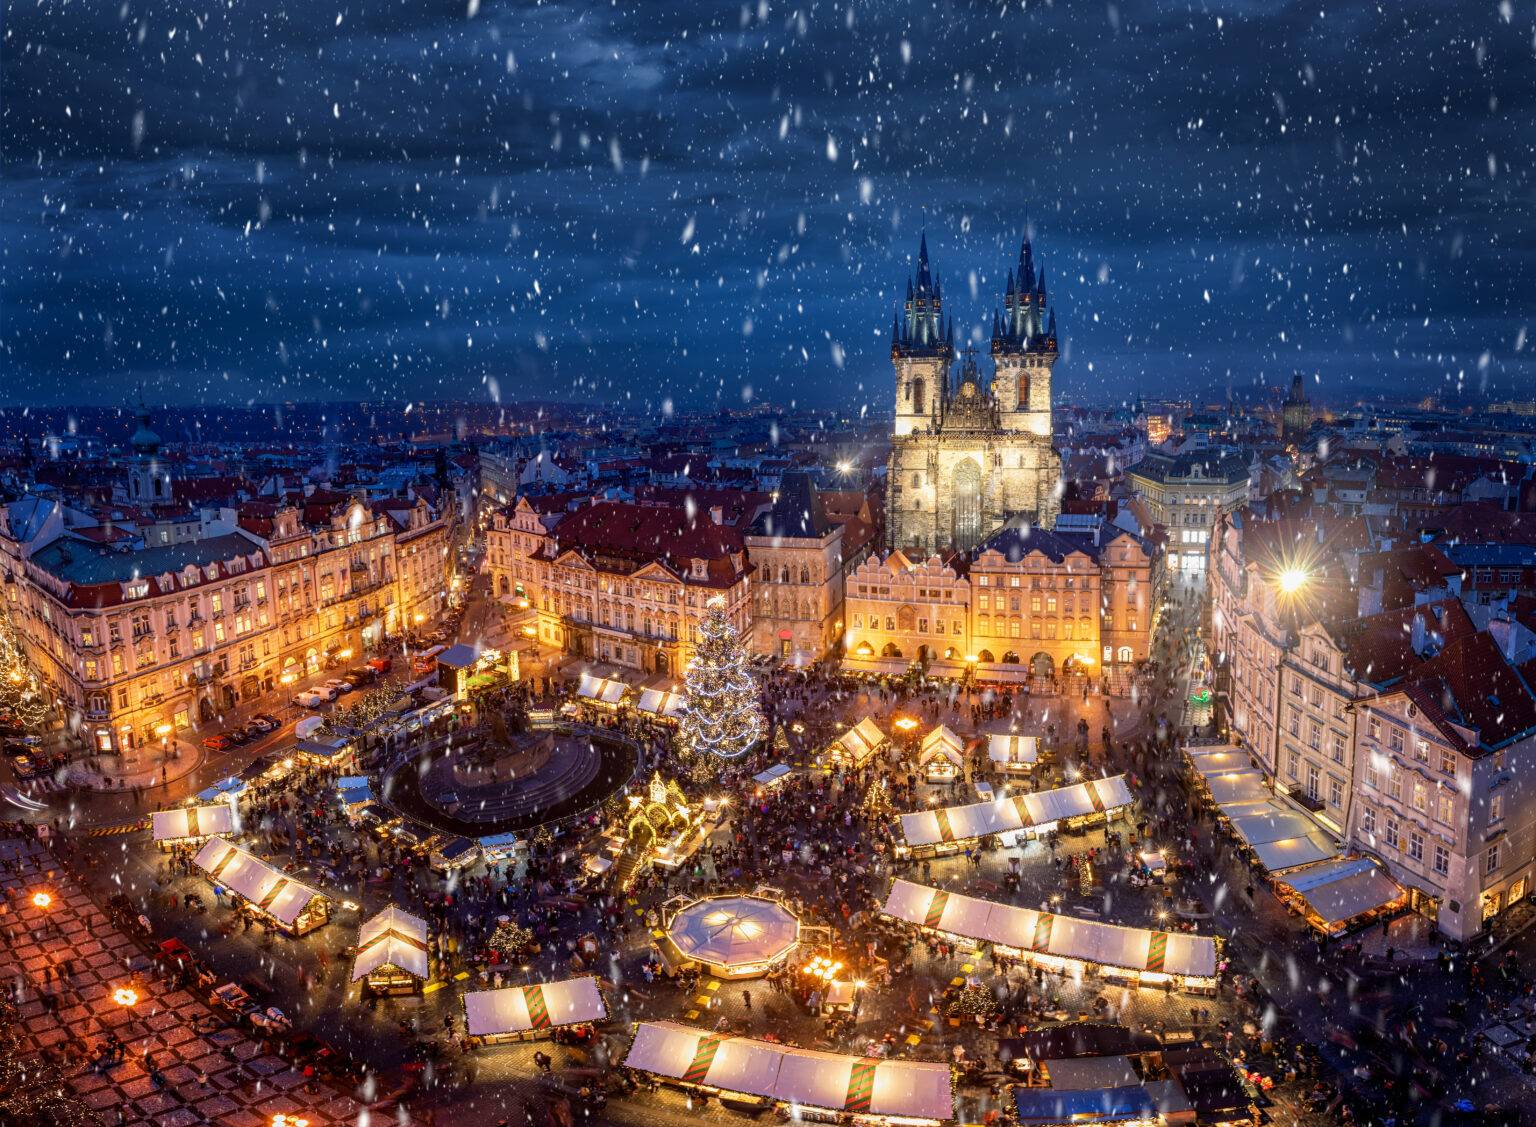 This £12 travel tip can help you see two European Christmas markets in one day